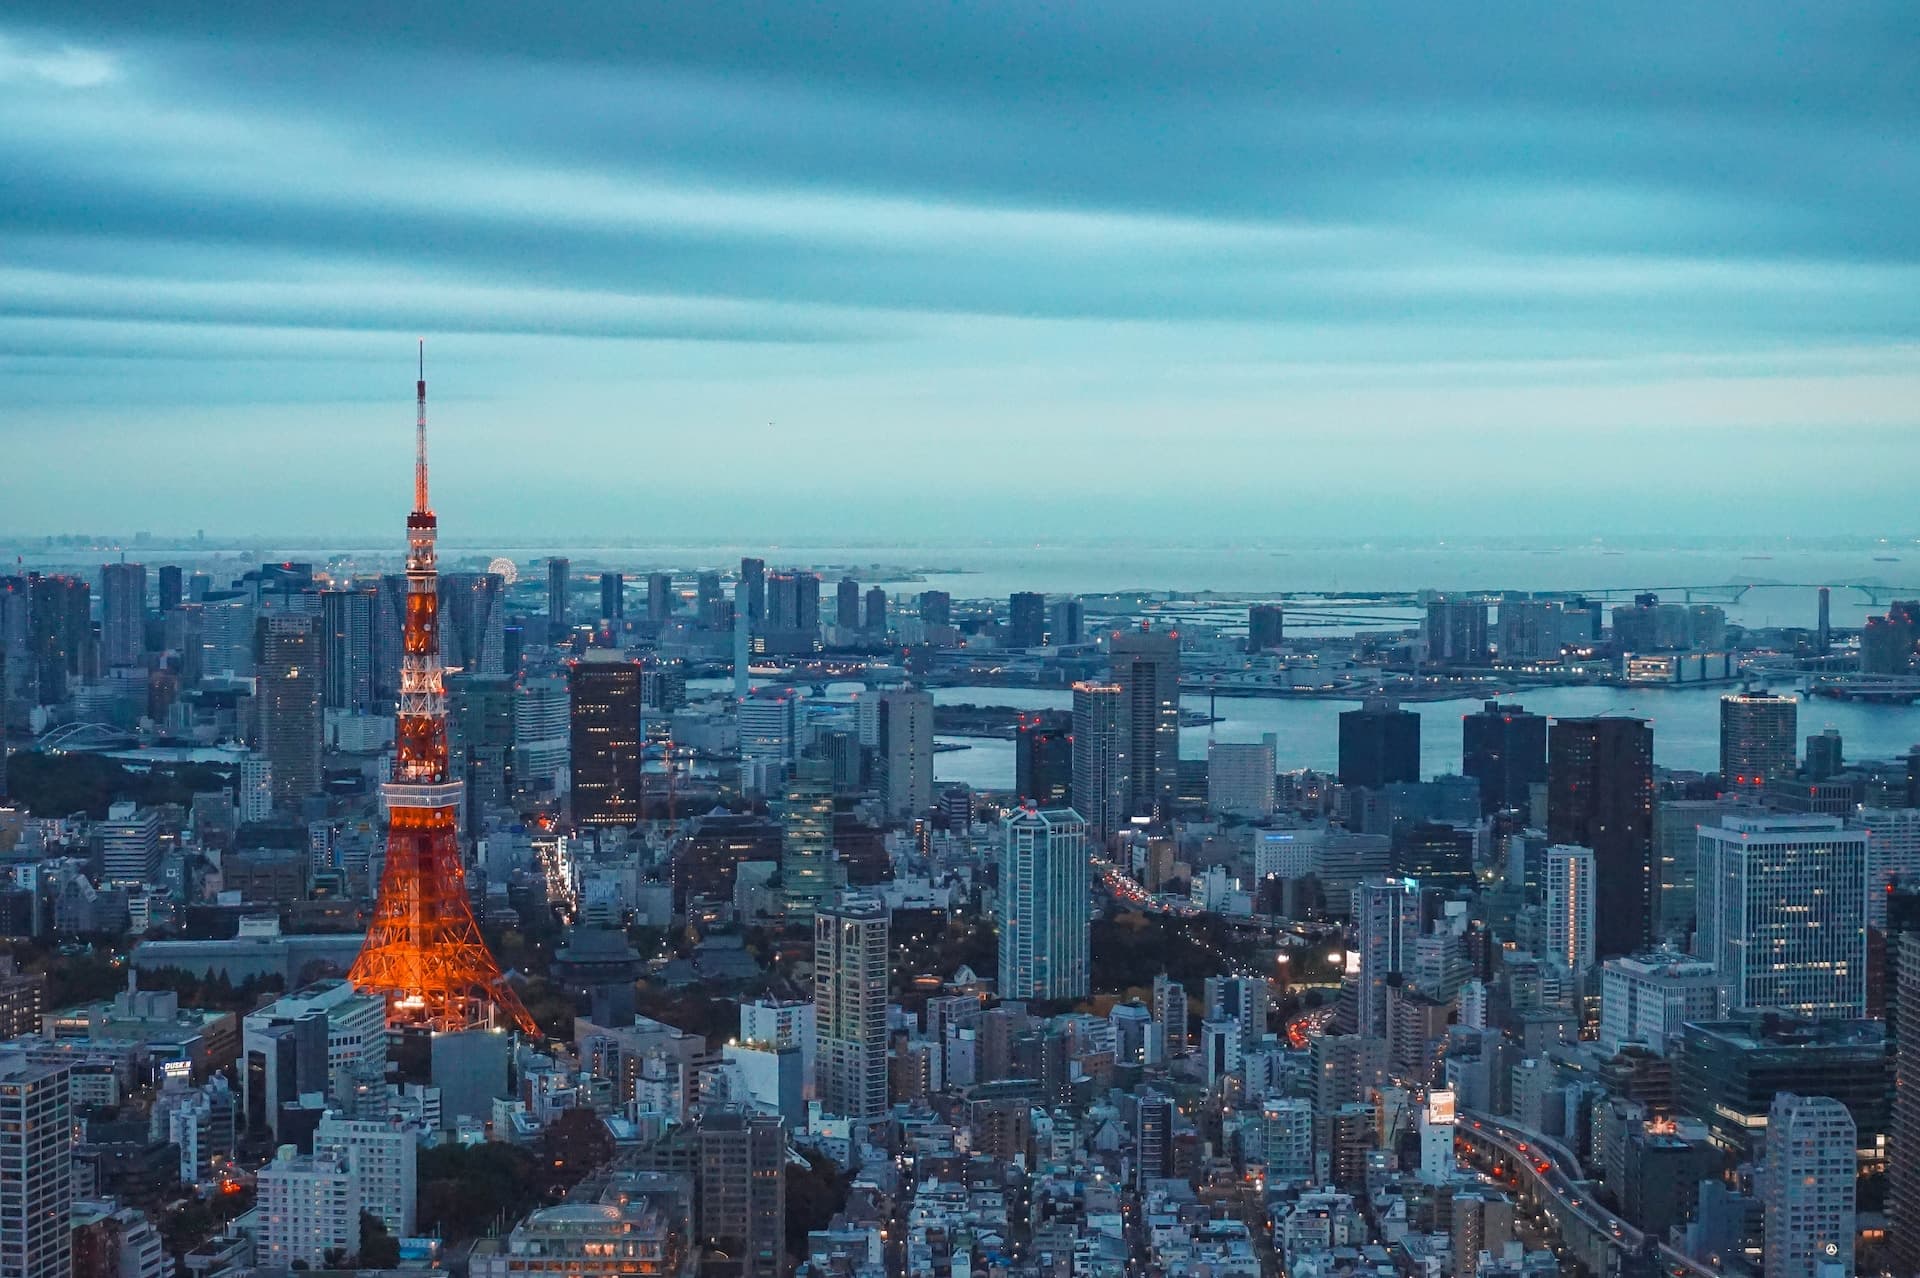 Tokyo: Where Tradition Meets Innovation